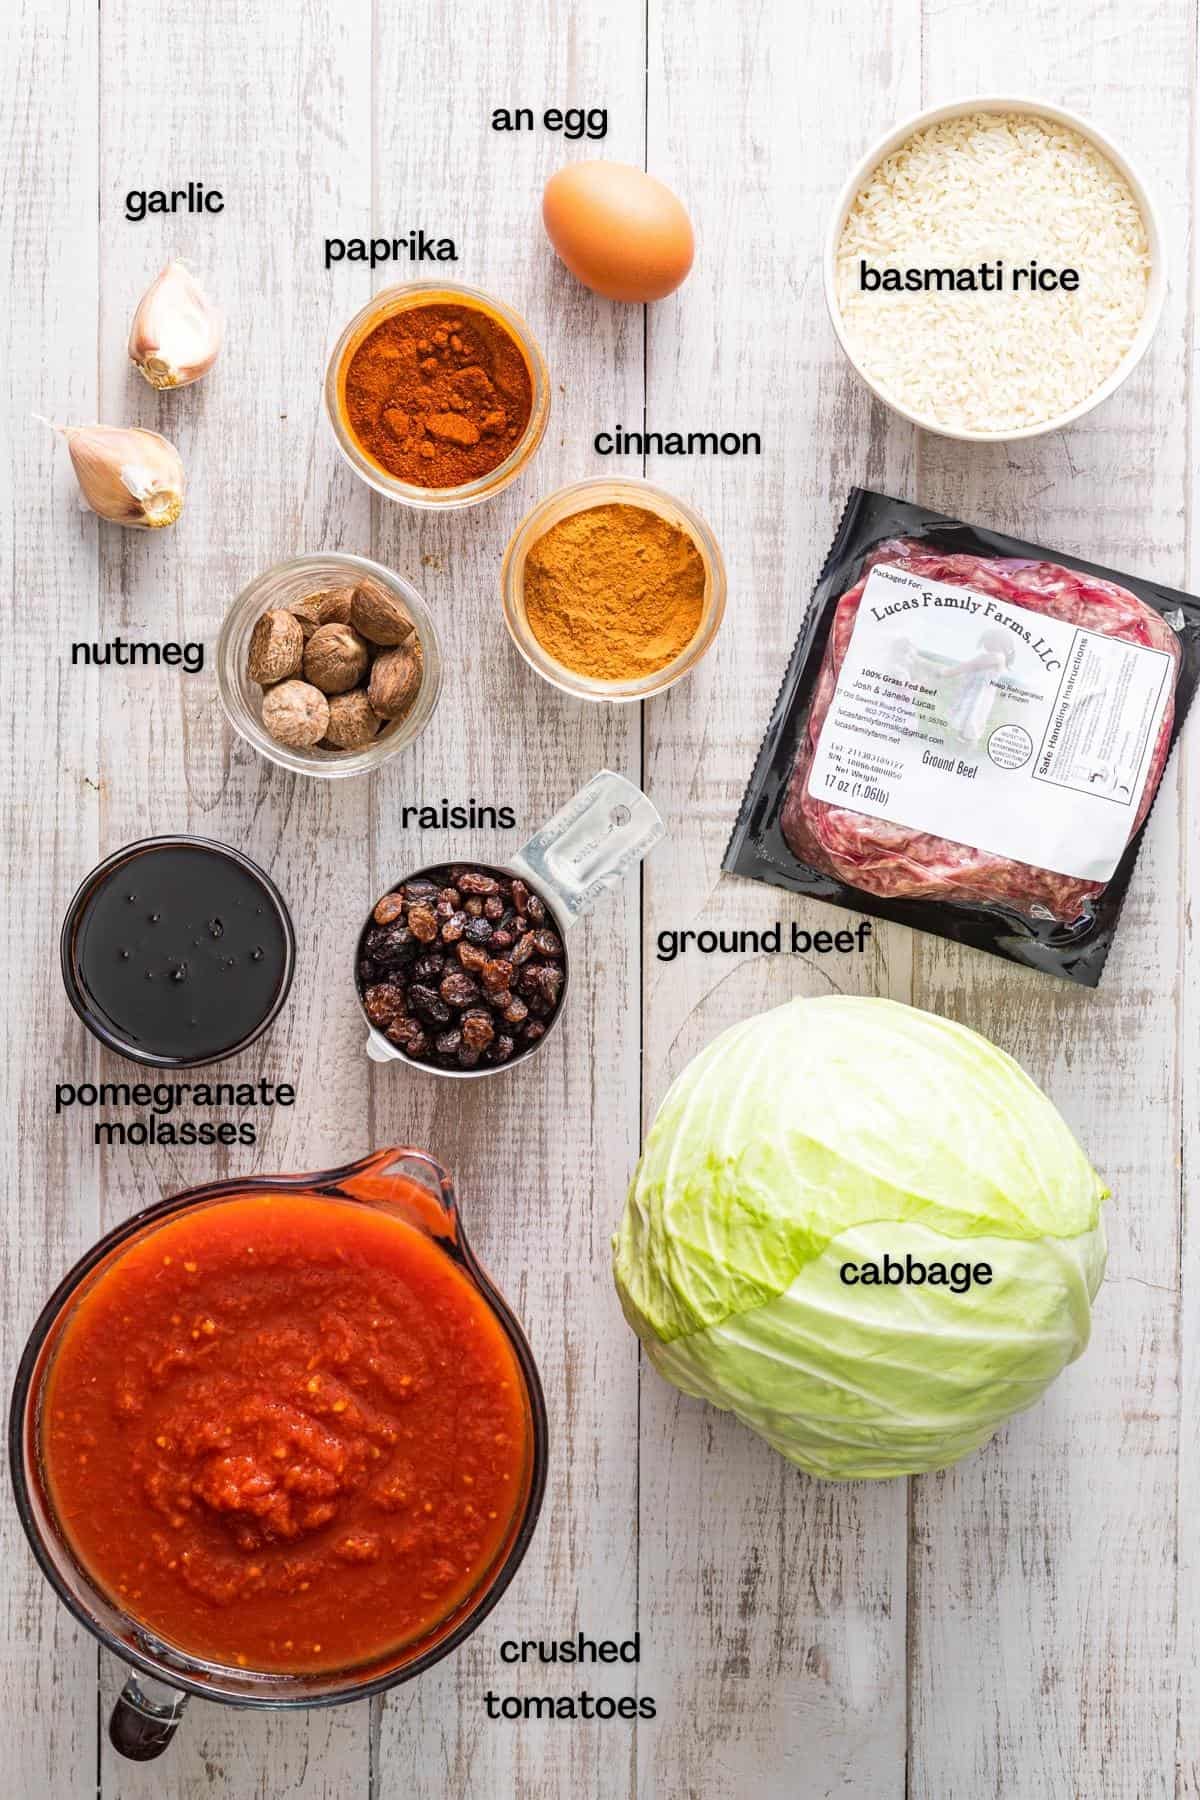 ingredients for stuffed cabbage